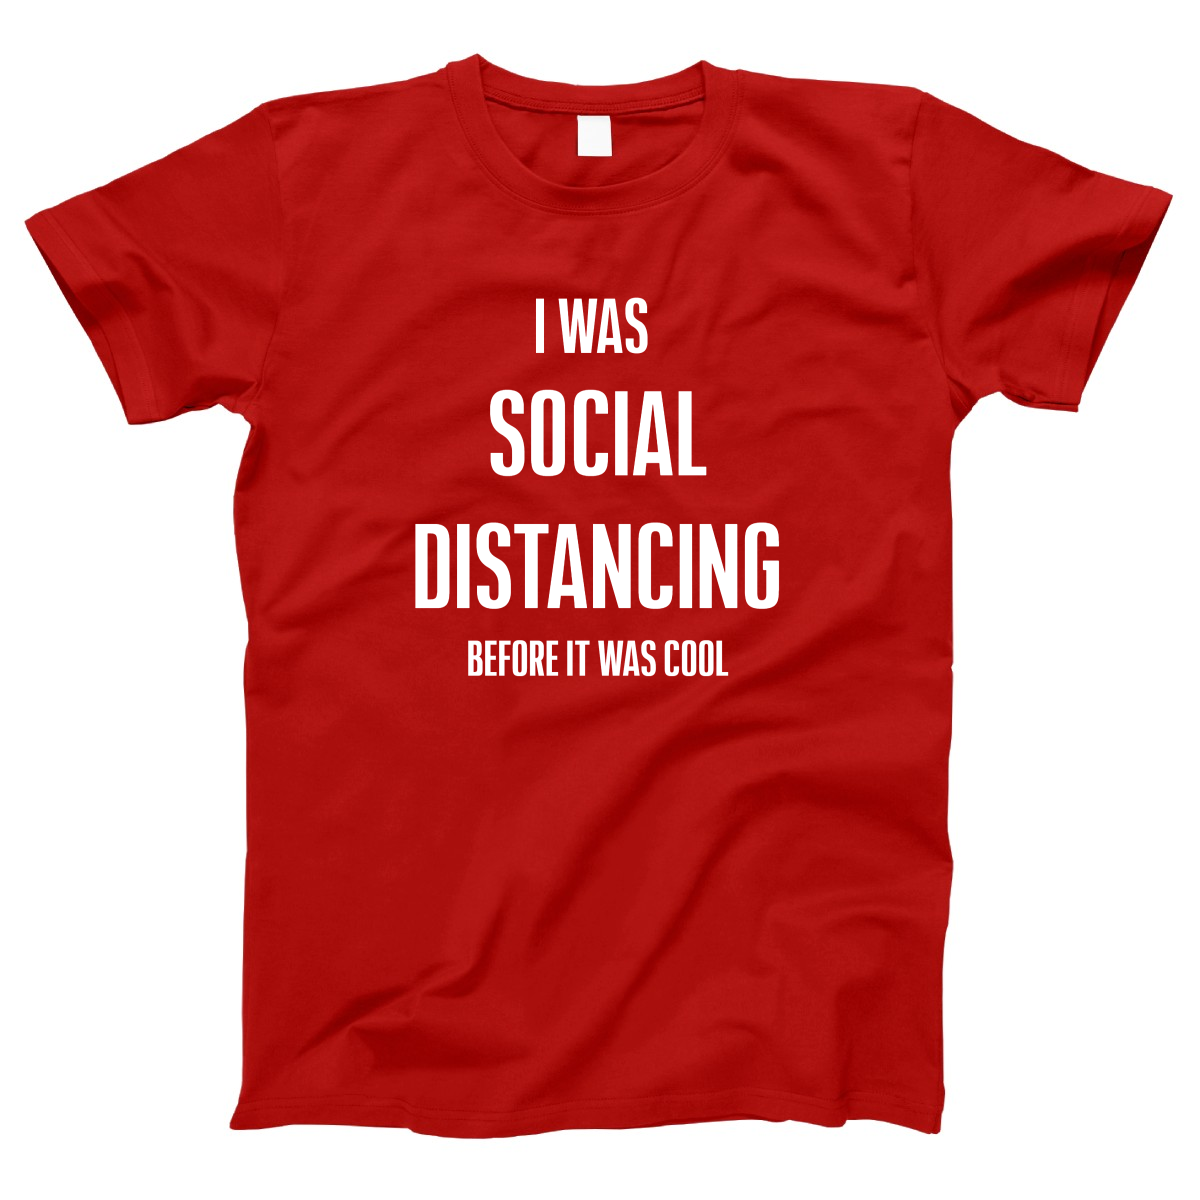 I was social distancing before it was cool Women's T-shirt | Red